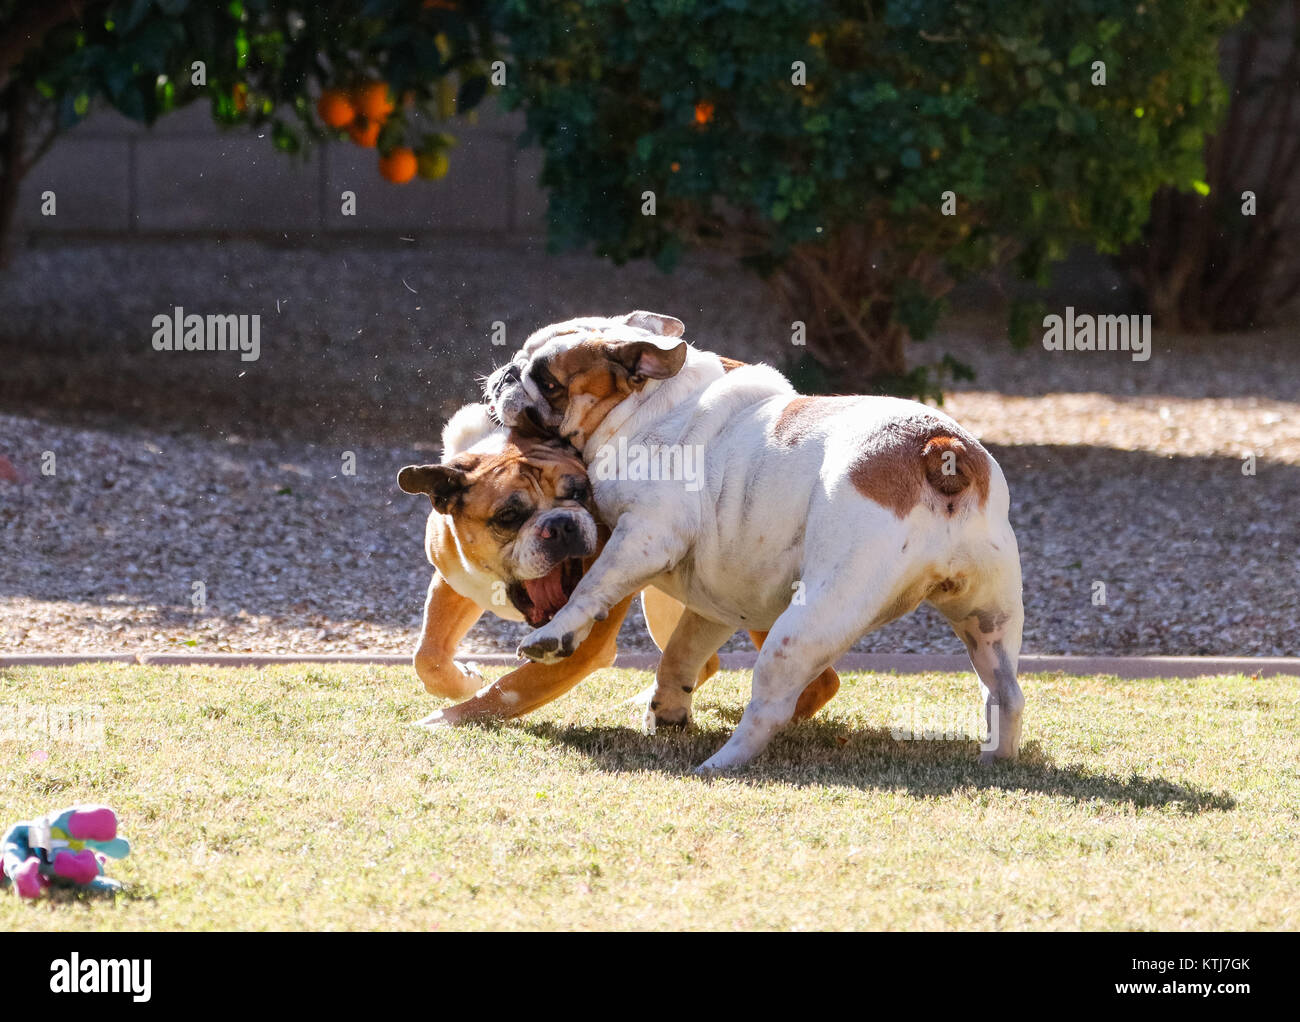 Two bulldogs playing while one grabs the other's leg Stock Photo